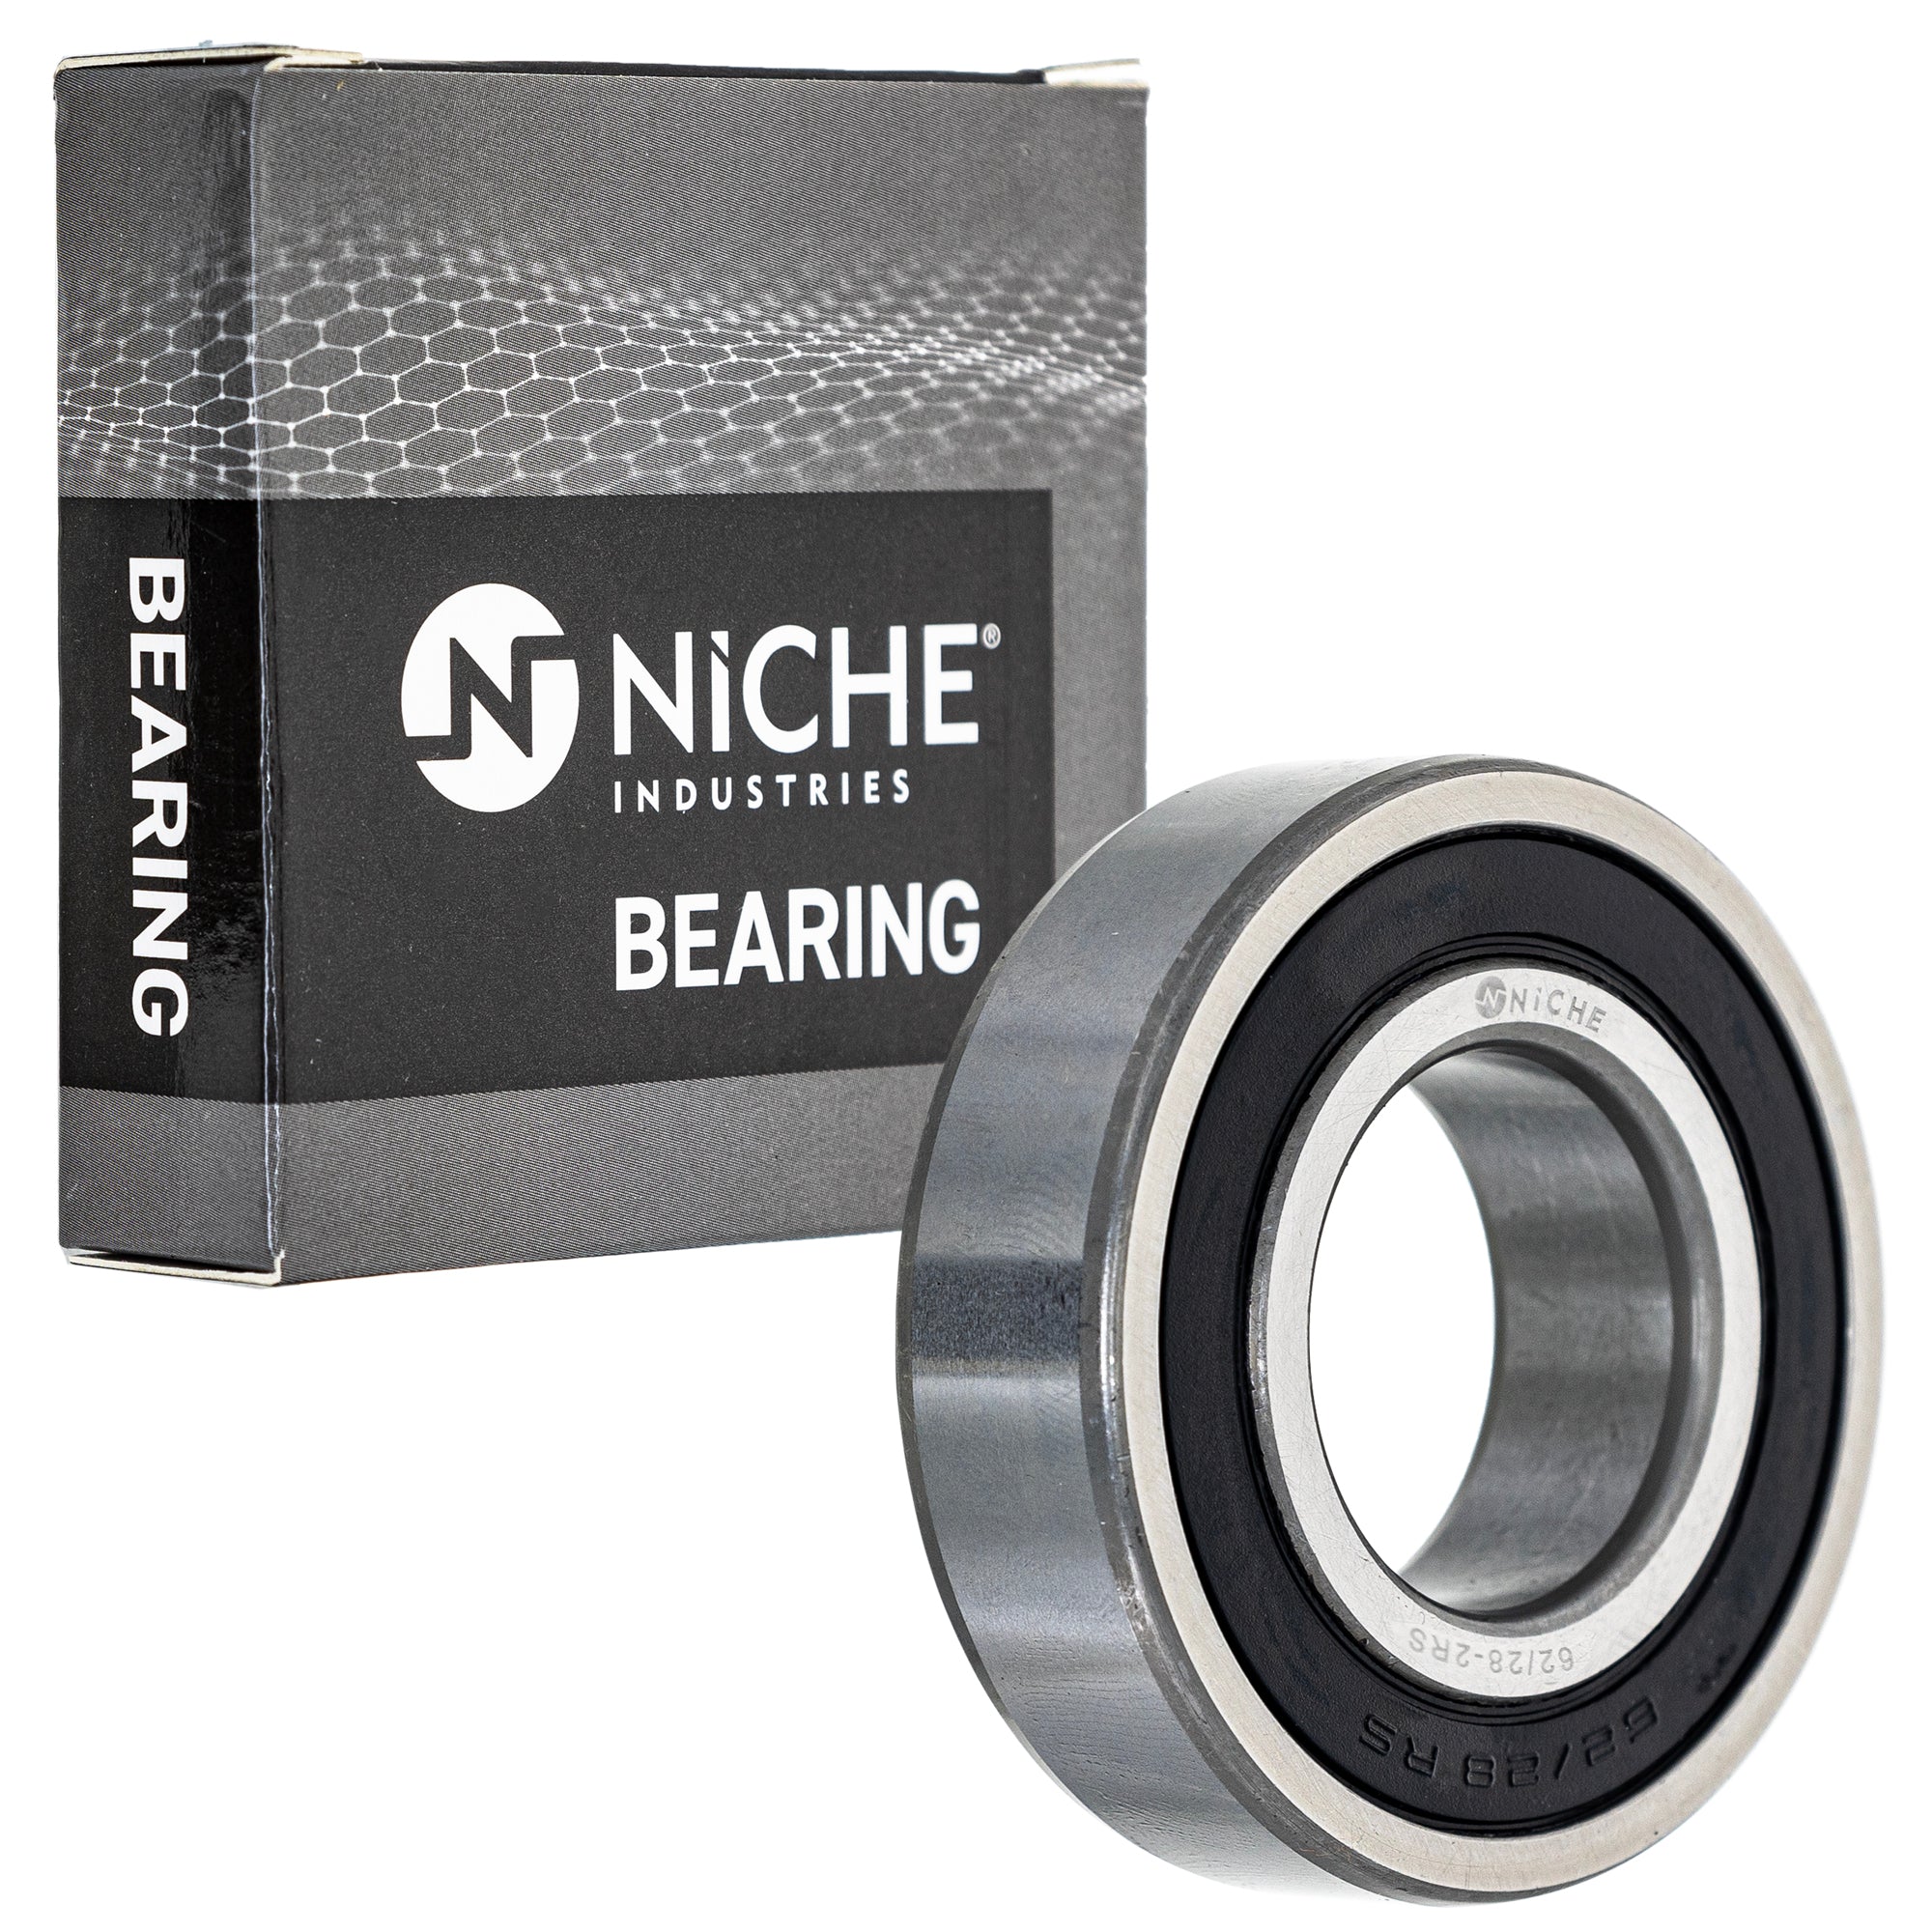 NICHE 519-CBB2235R Bearing for zOTHER YZF XSR900 XSR700 Tracer